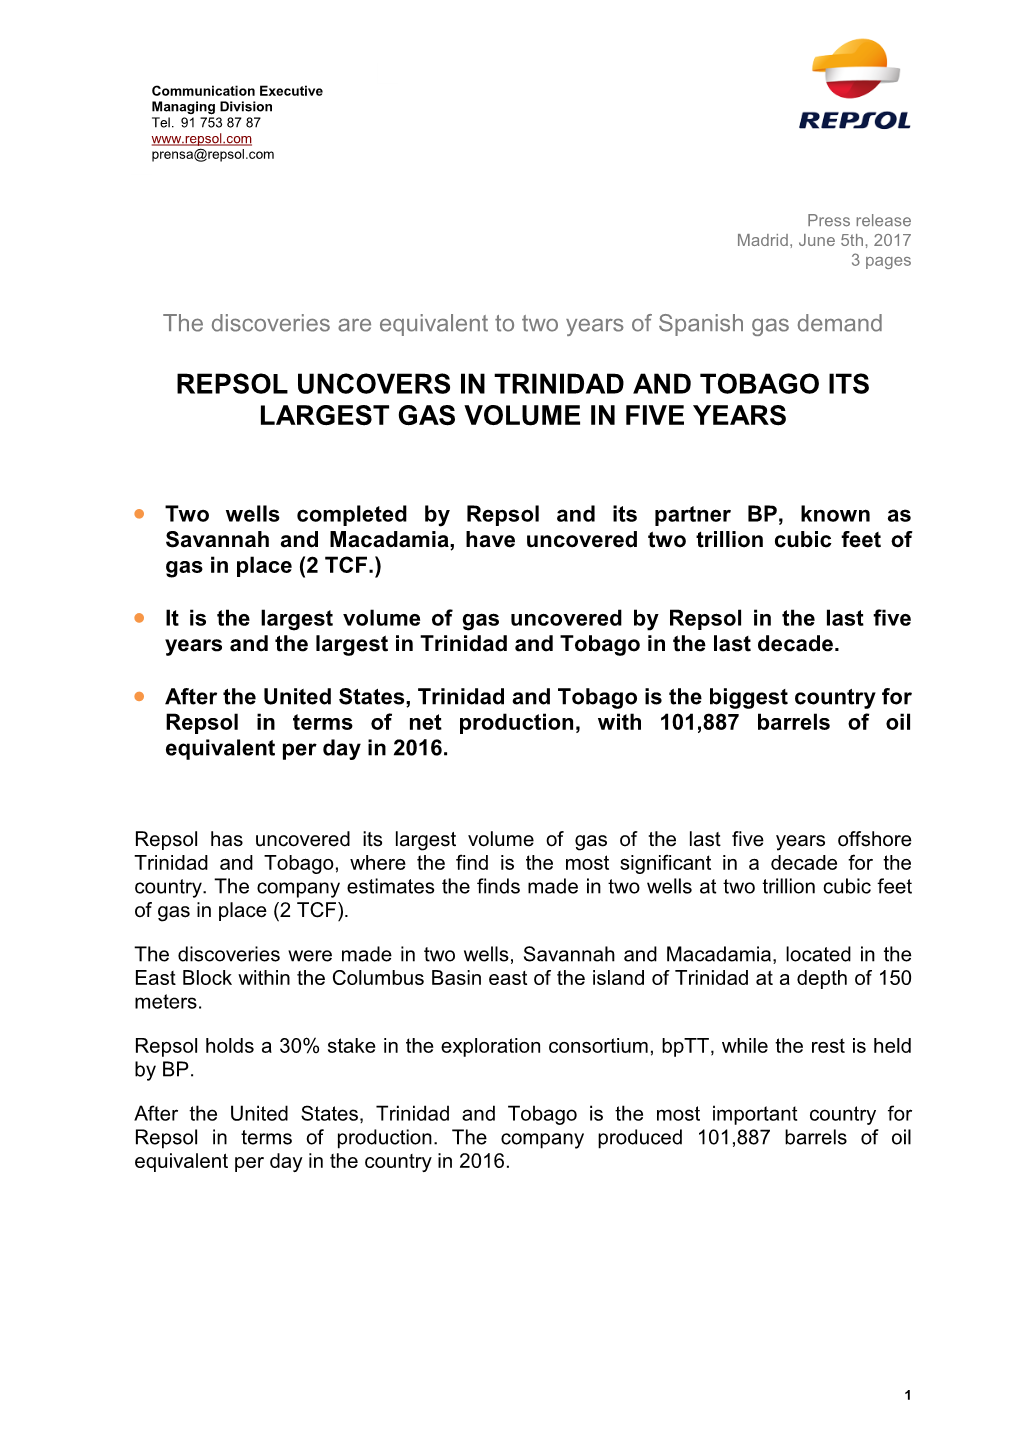 Repsol Uncovers in Trinidad and Tobago Its Largest Gas Volume in Five Years